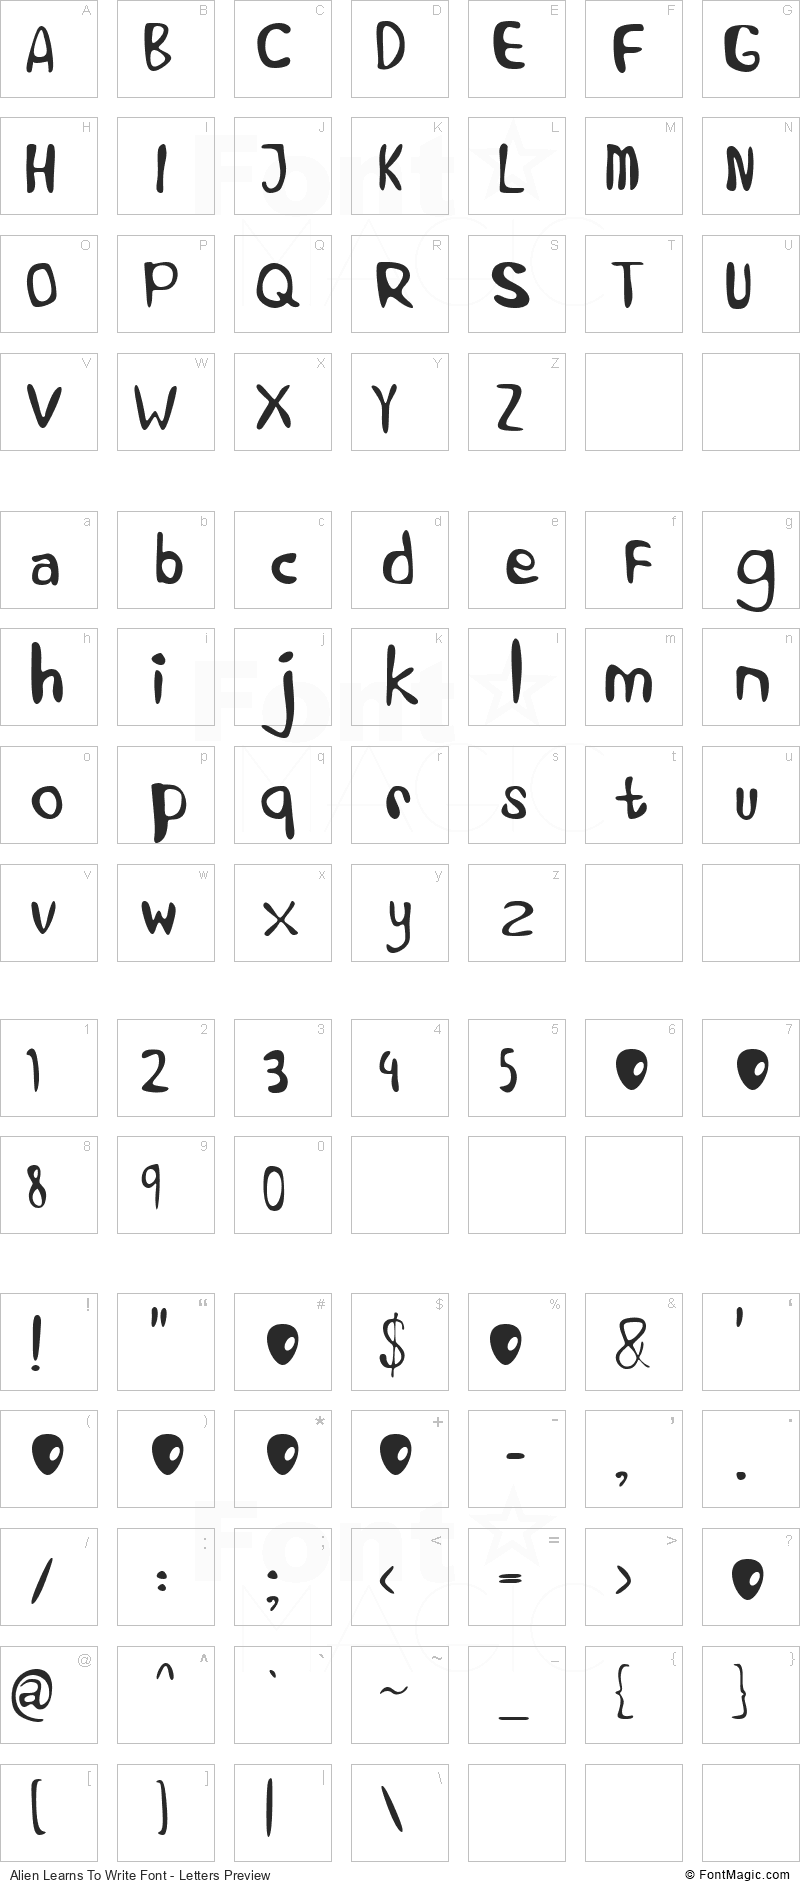 Alien Learns To Write Font - All Latters Preview Chart